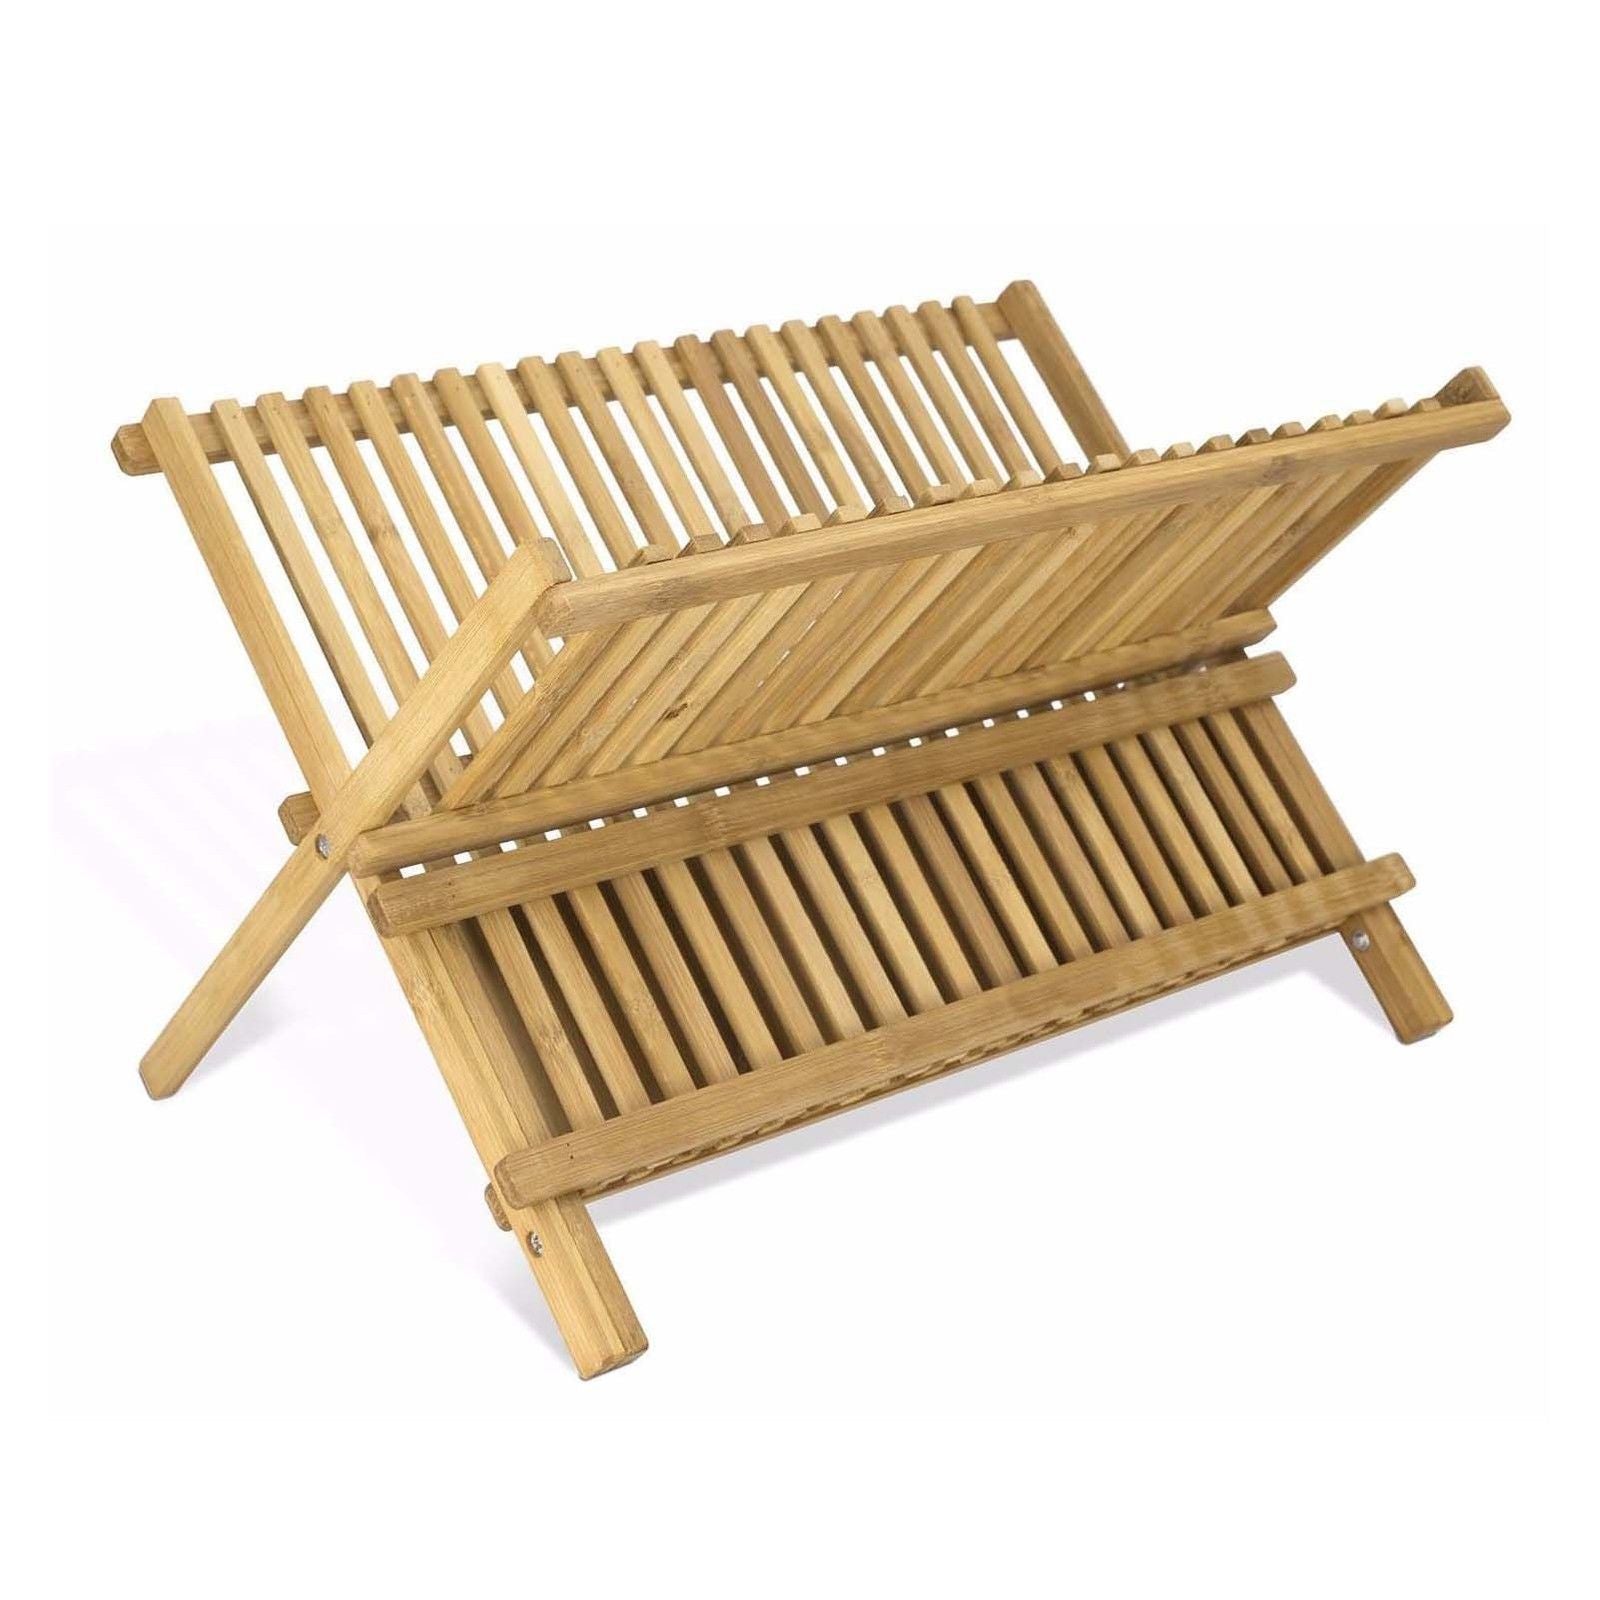 2-Tier 100% Bamboo Folding Dish Draining and Drying Rack 17 x 13 x 11 Inches